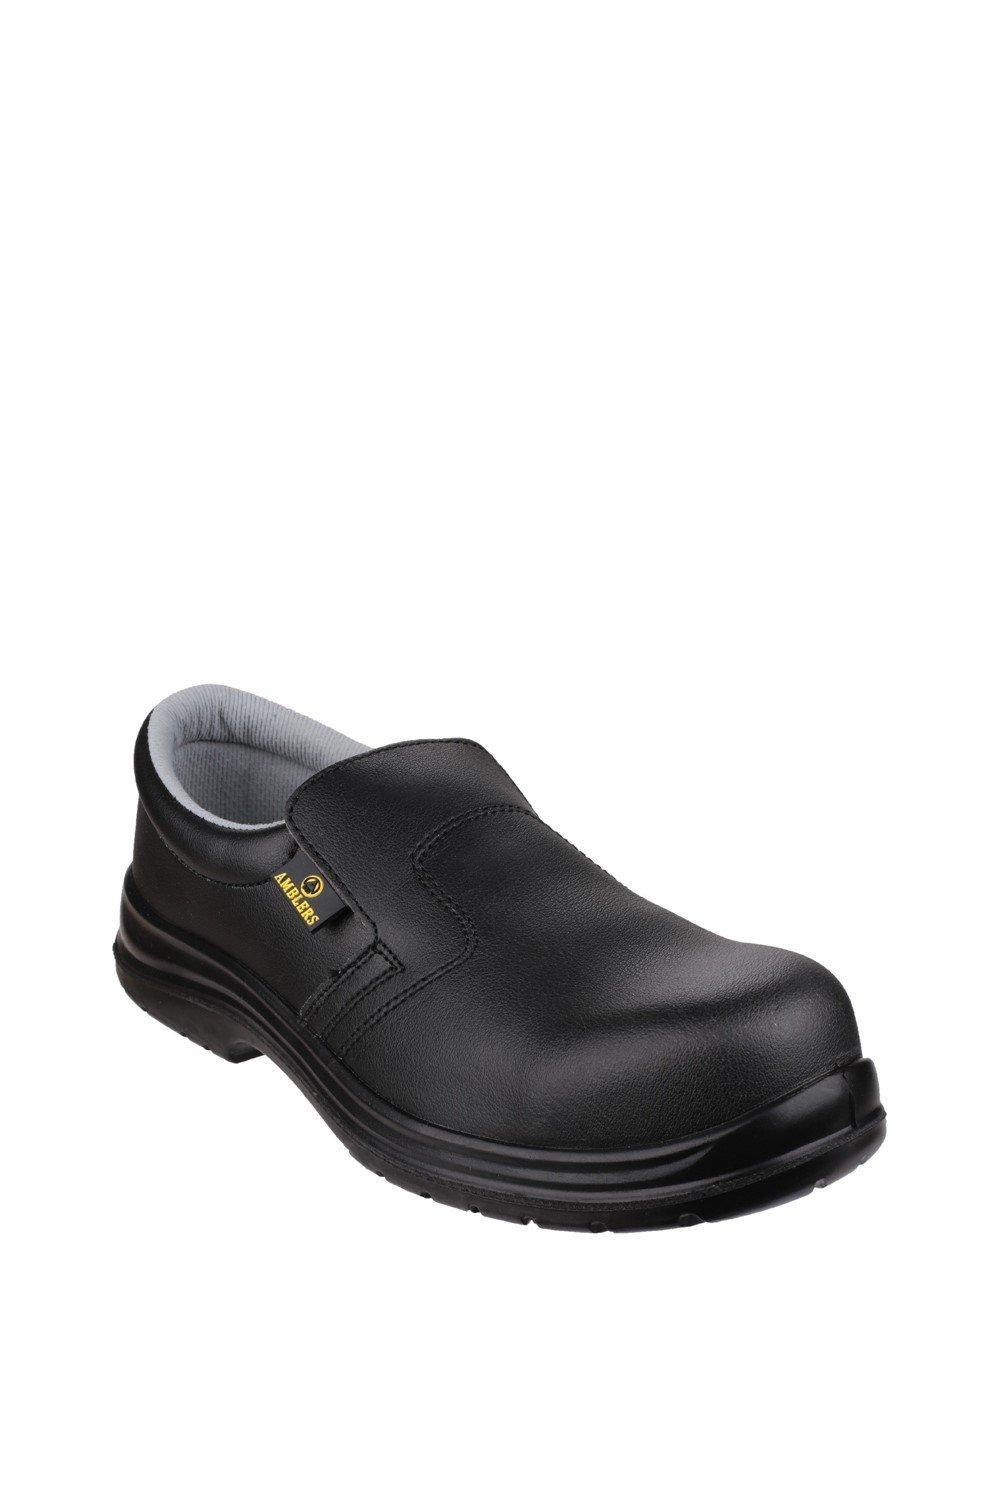 'FS661' Safety Shoes